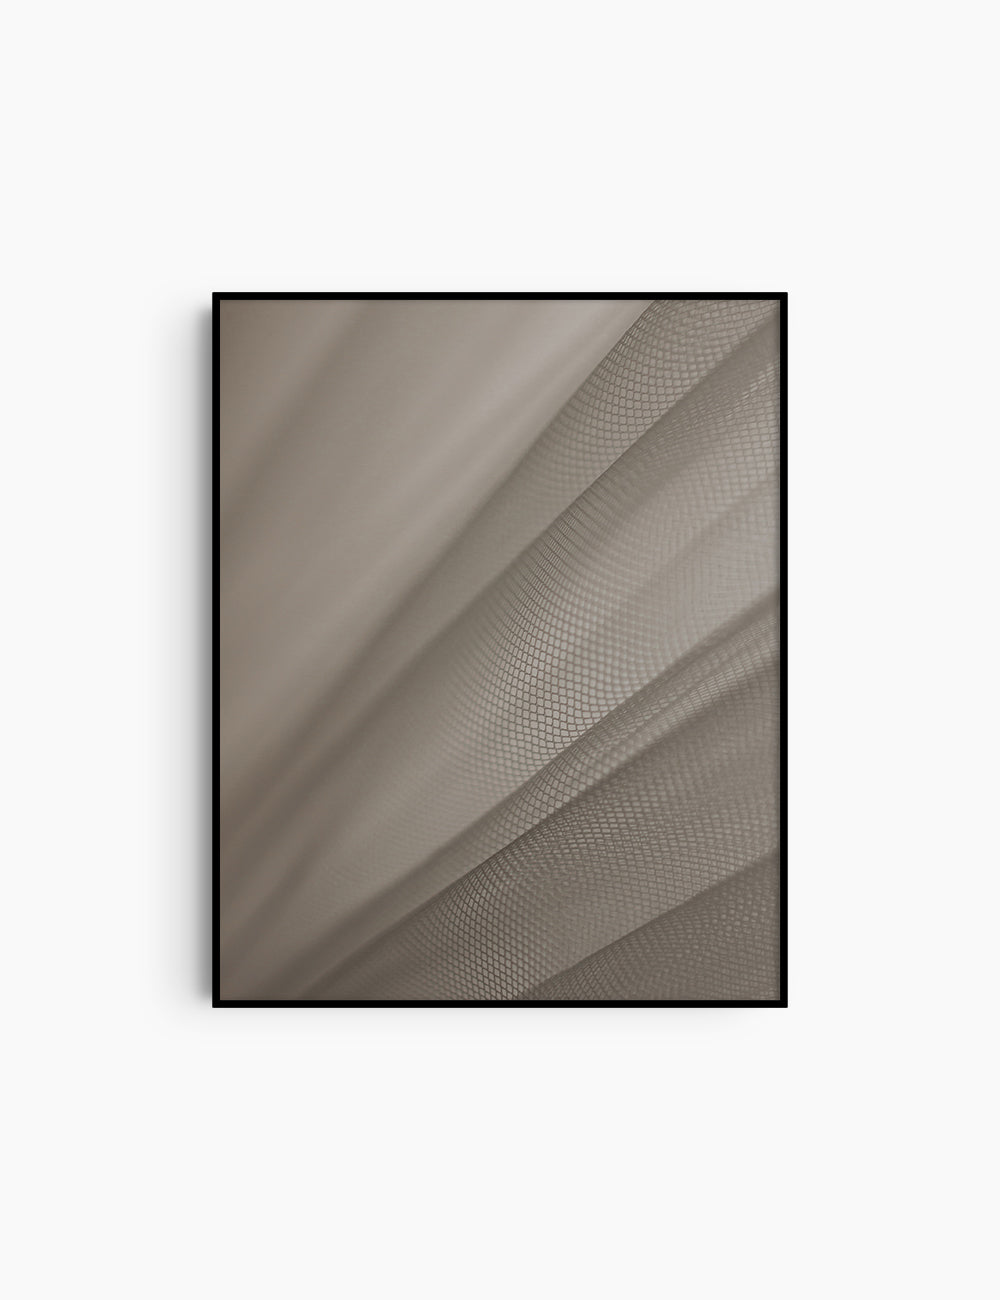 Abstract minimalist photography 1.1 Beige aesthetic. Printable wall art photography. PAPER MOON Art & Design